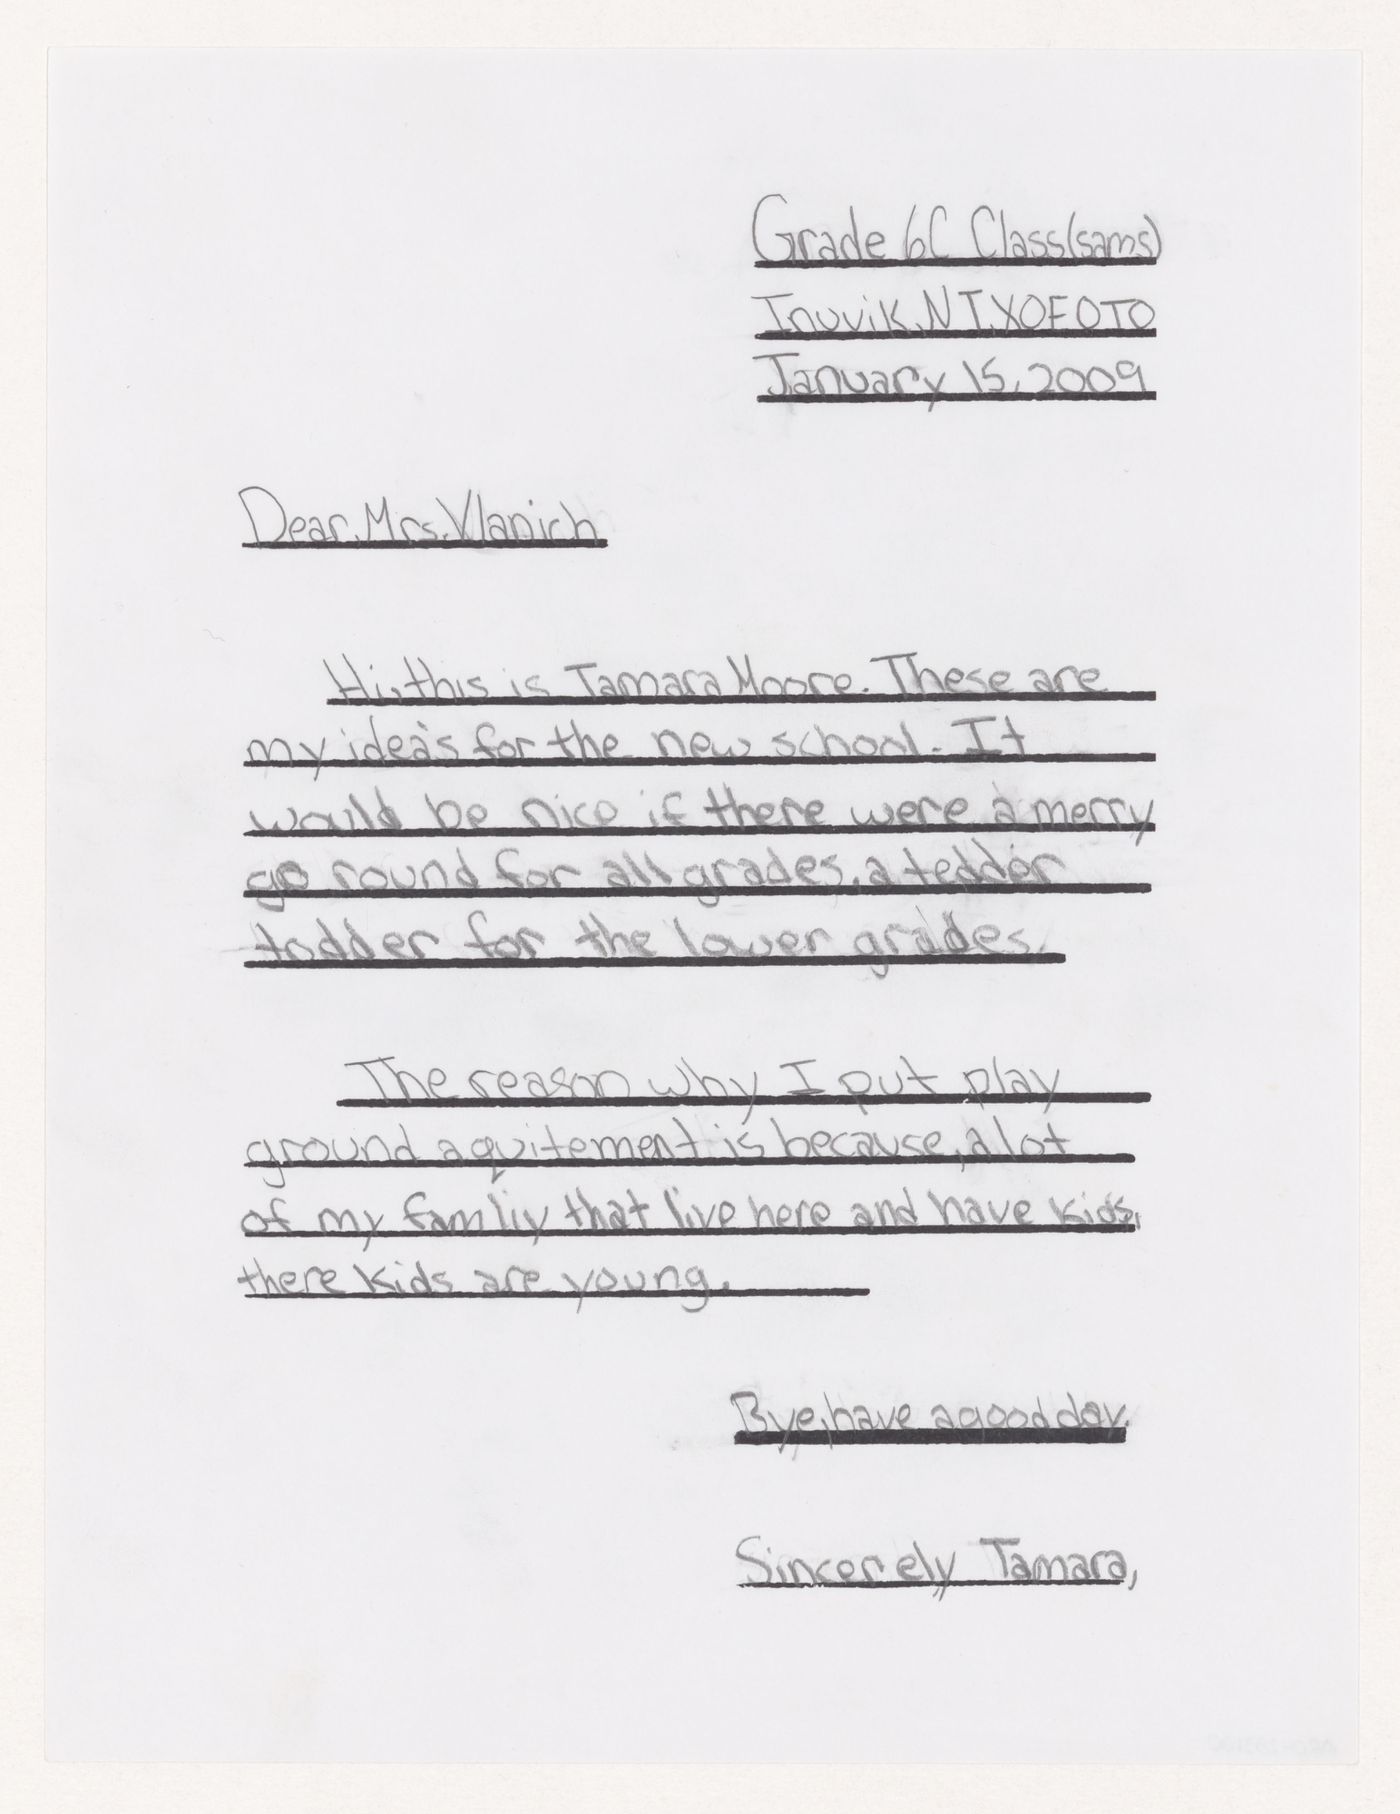 Letter from student for Inuvik School, Inuvik, Northwest Territories